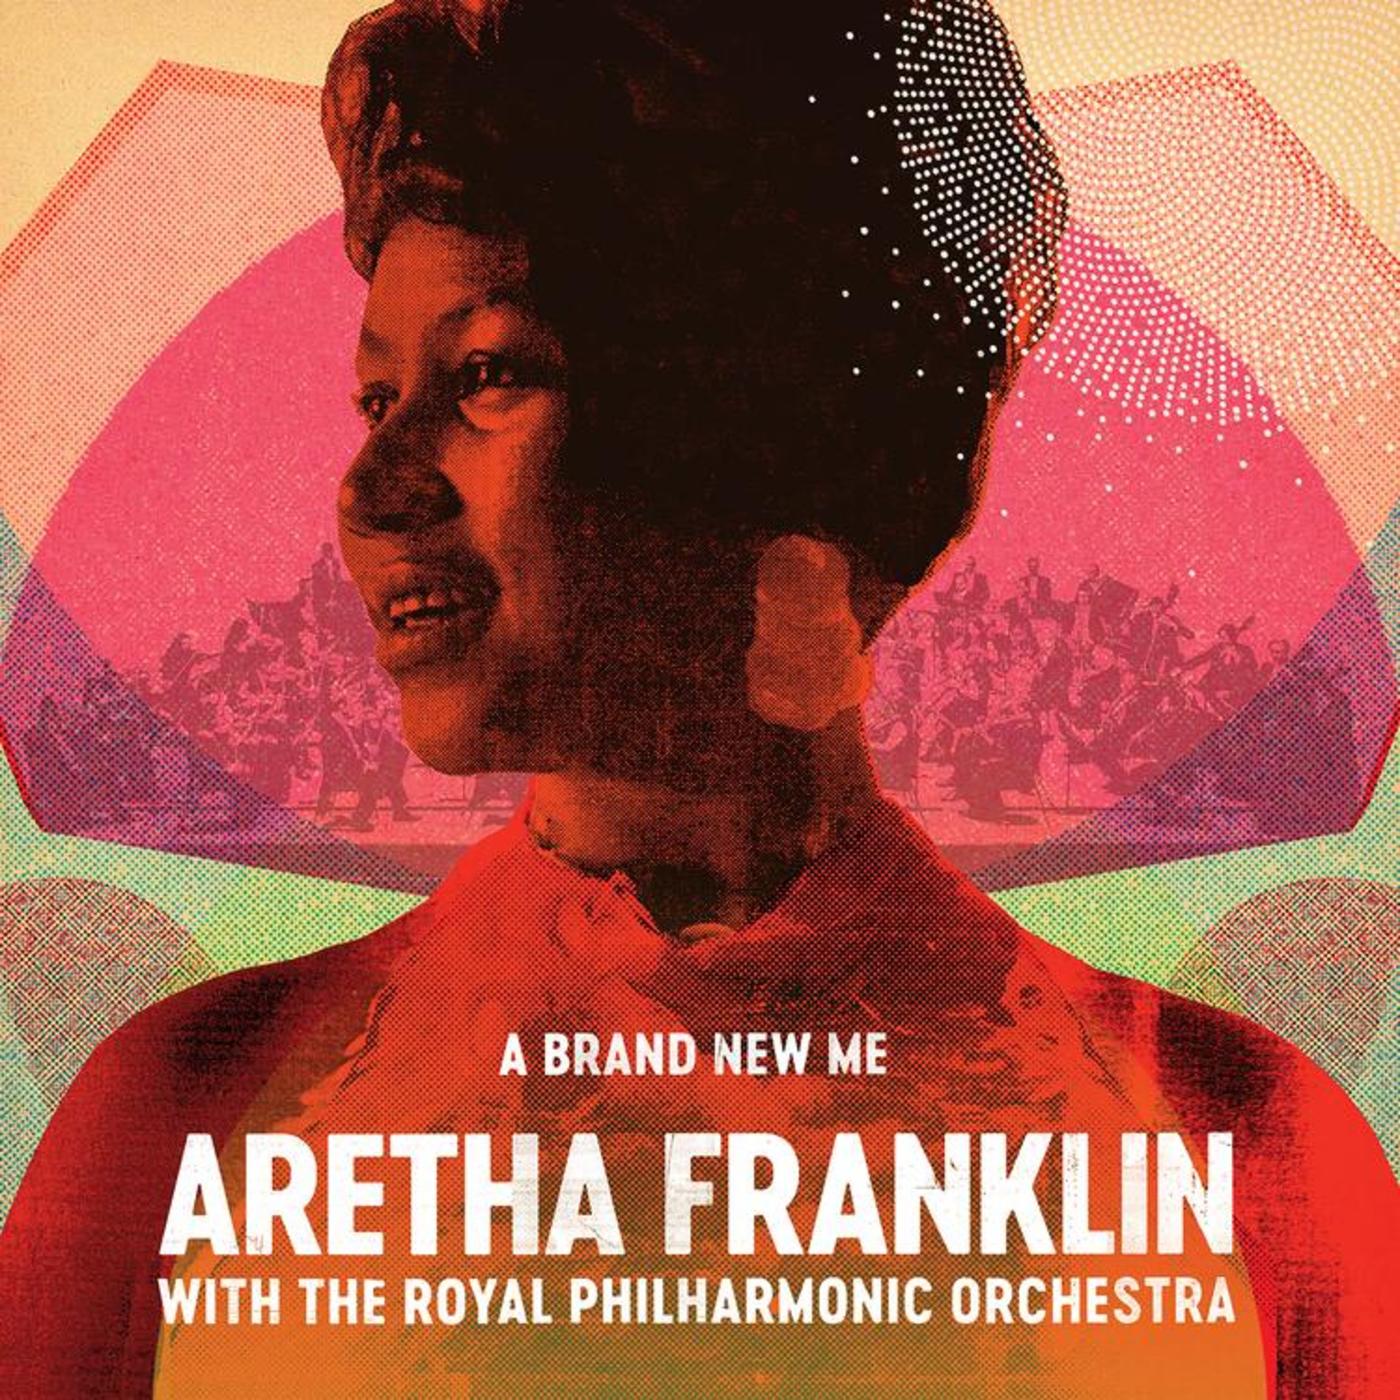 A Brand New Me: Aretha Franklin With The Royal Philharmonic Orchestra